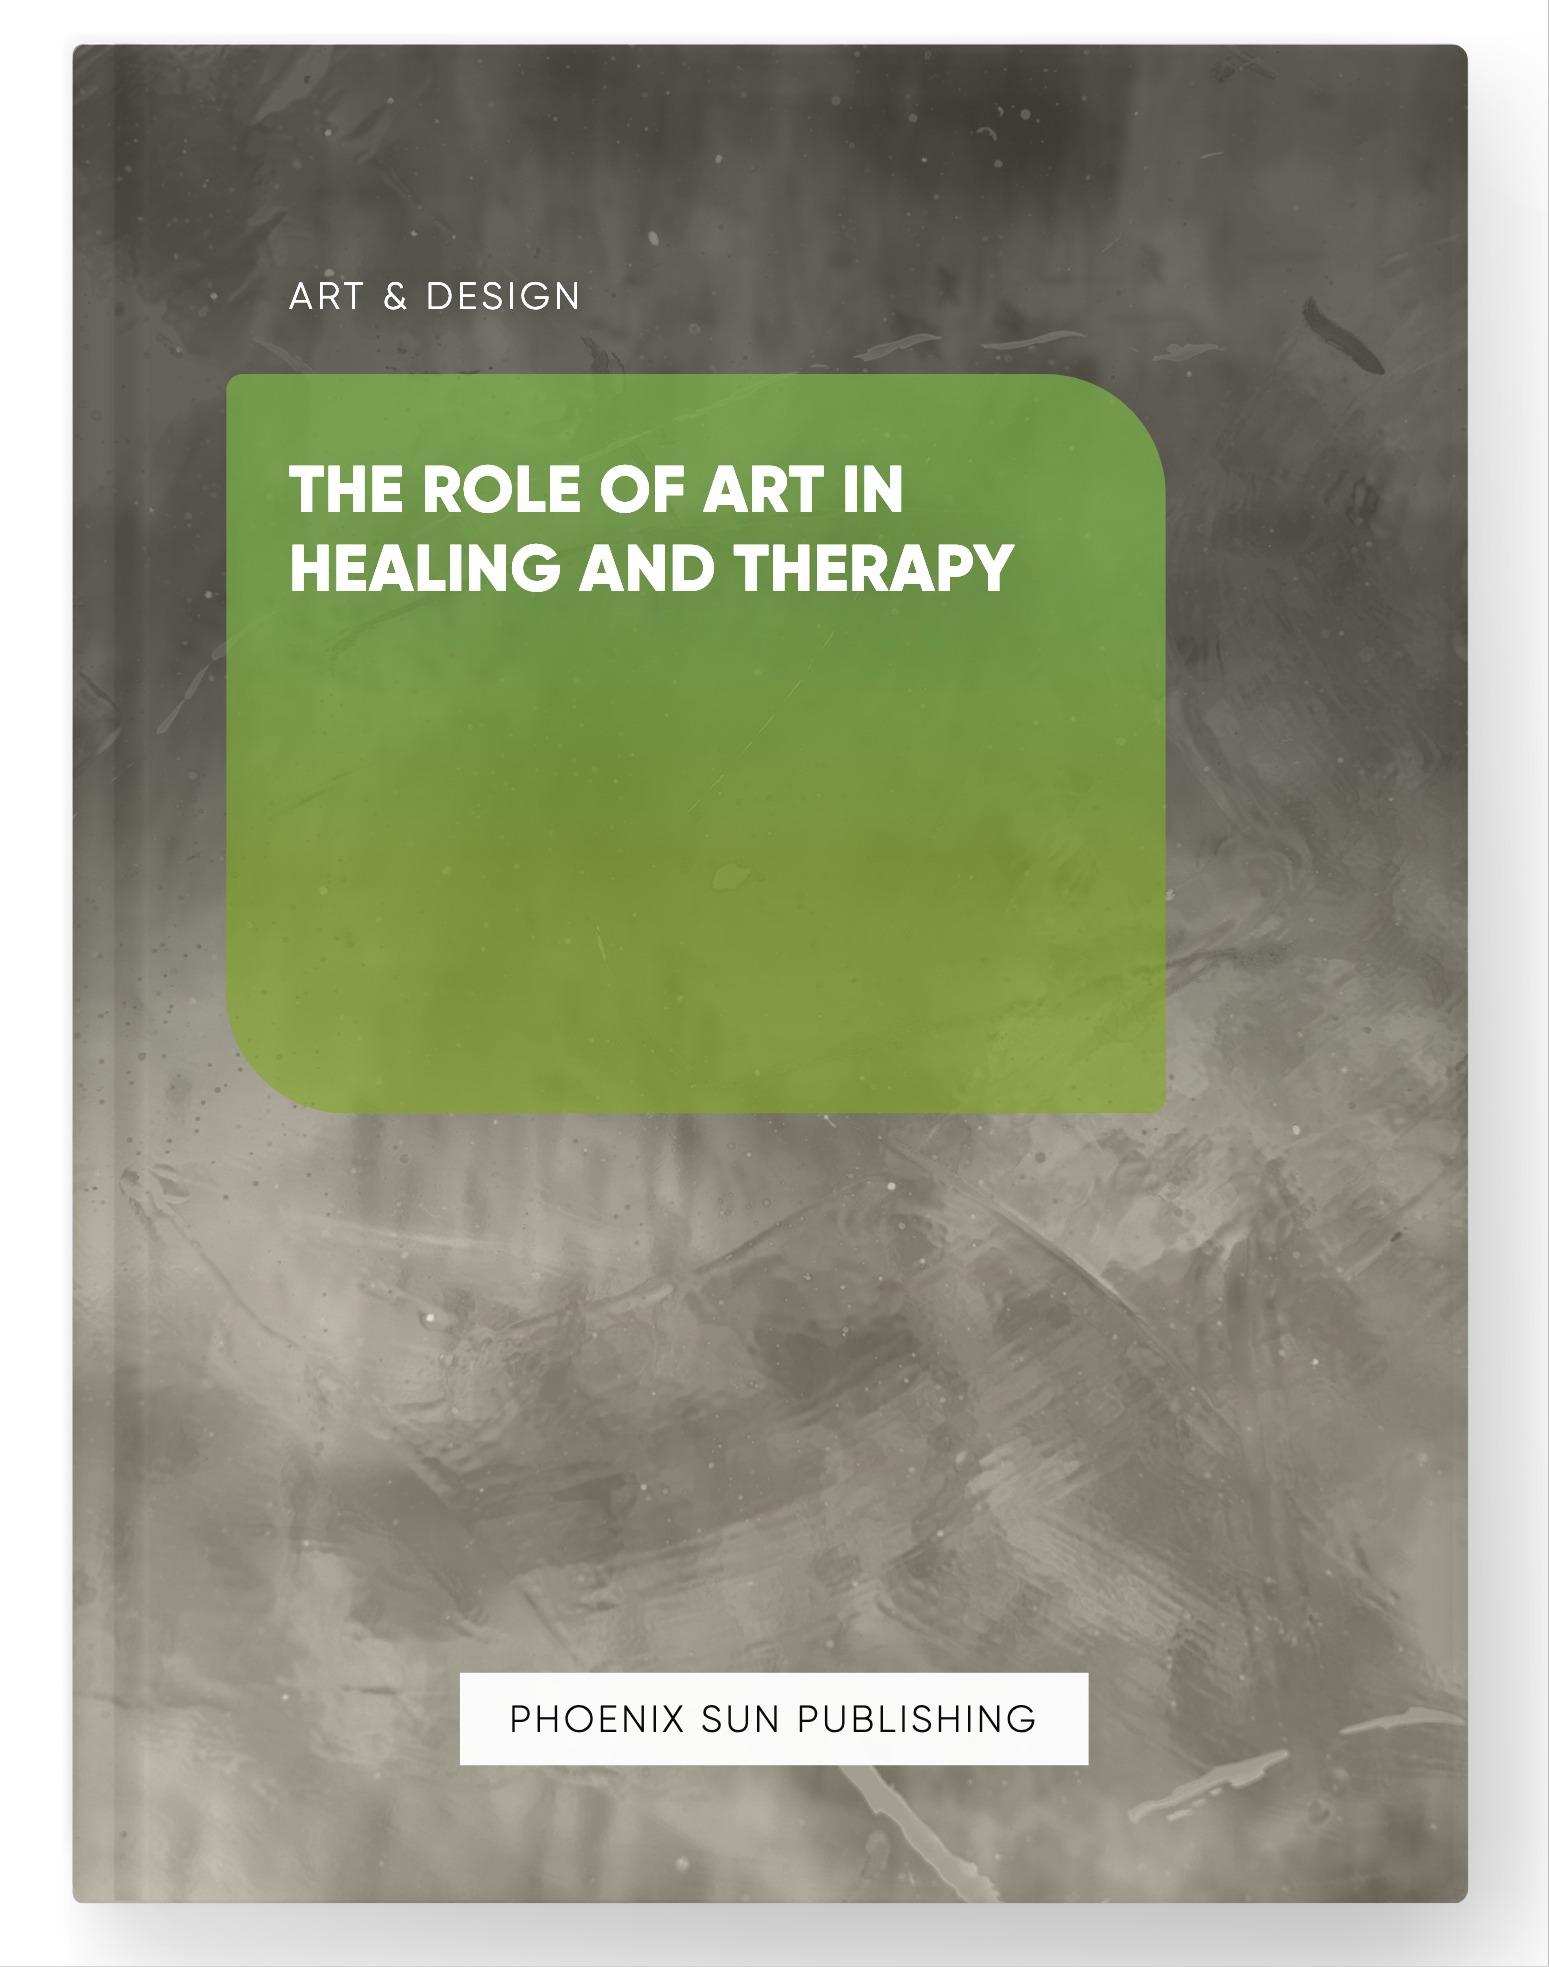 The Role of Art in Healing and Therapy